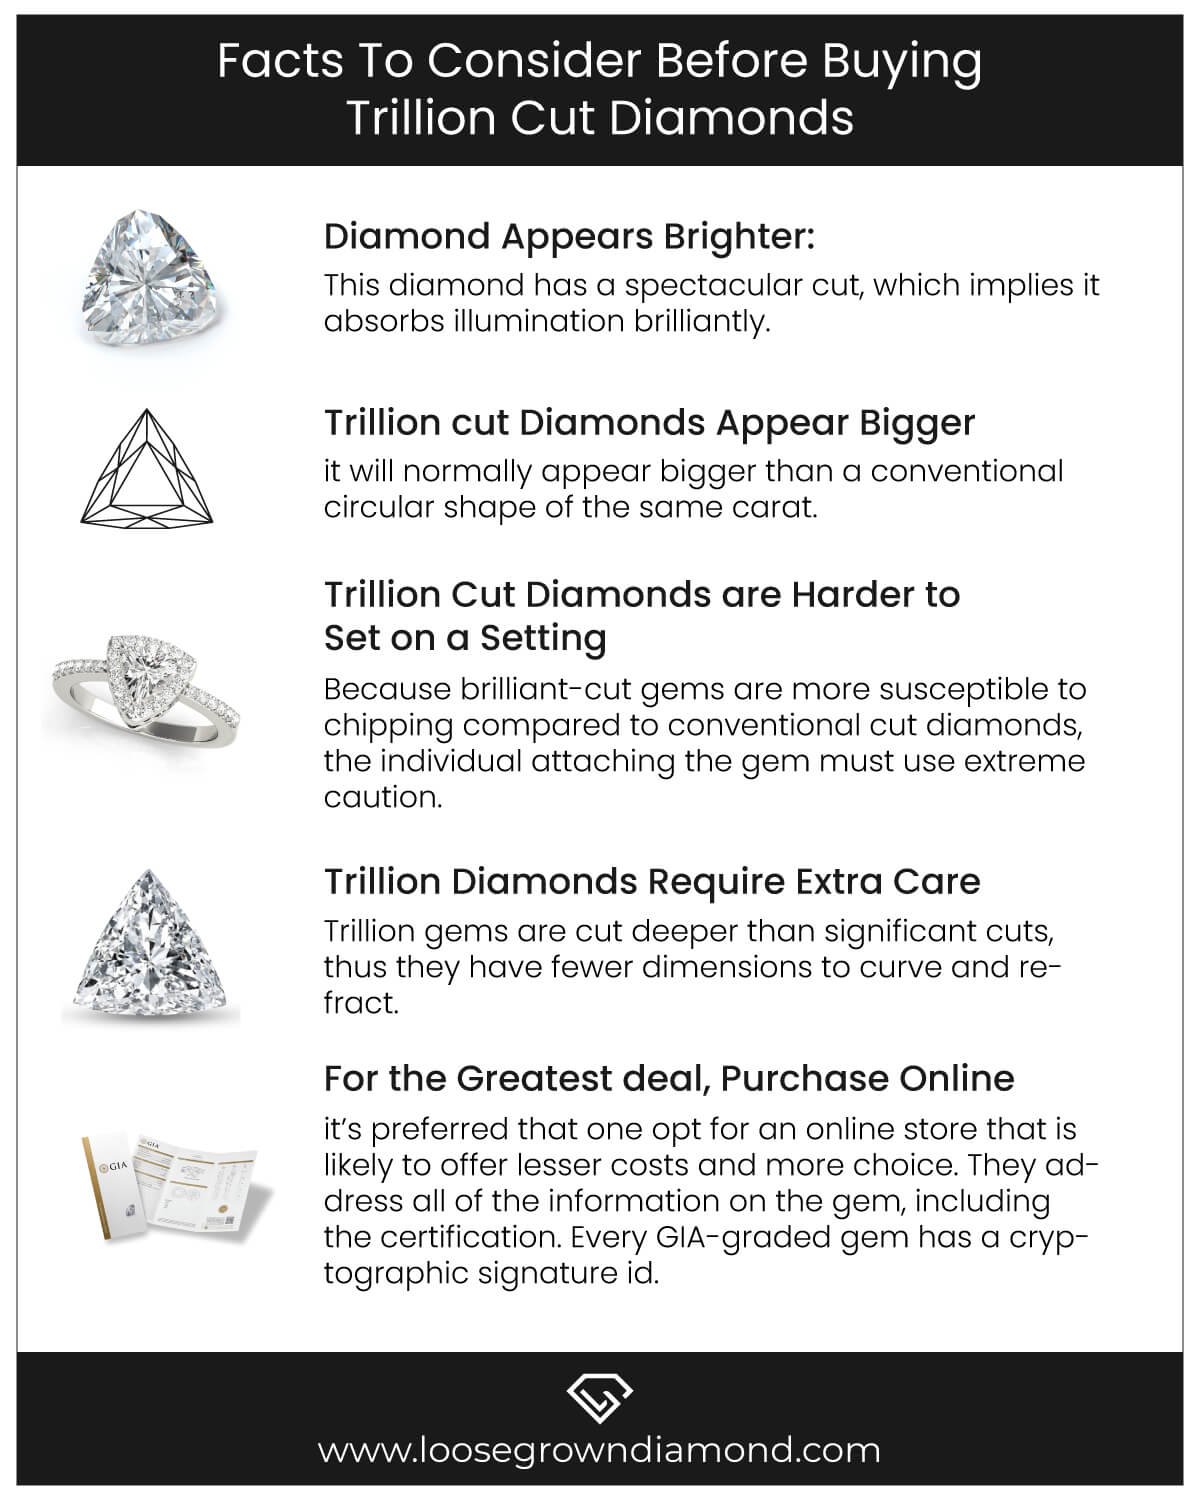 Facts To Consider Before Buying Trillion Cut Diamonds infographics